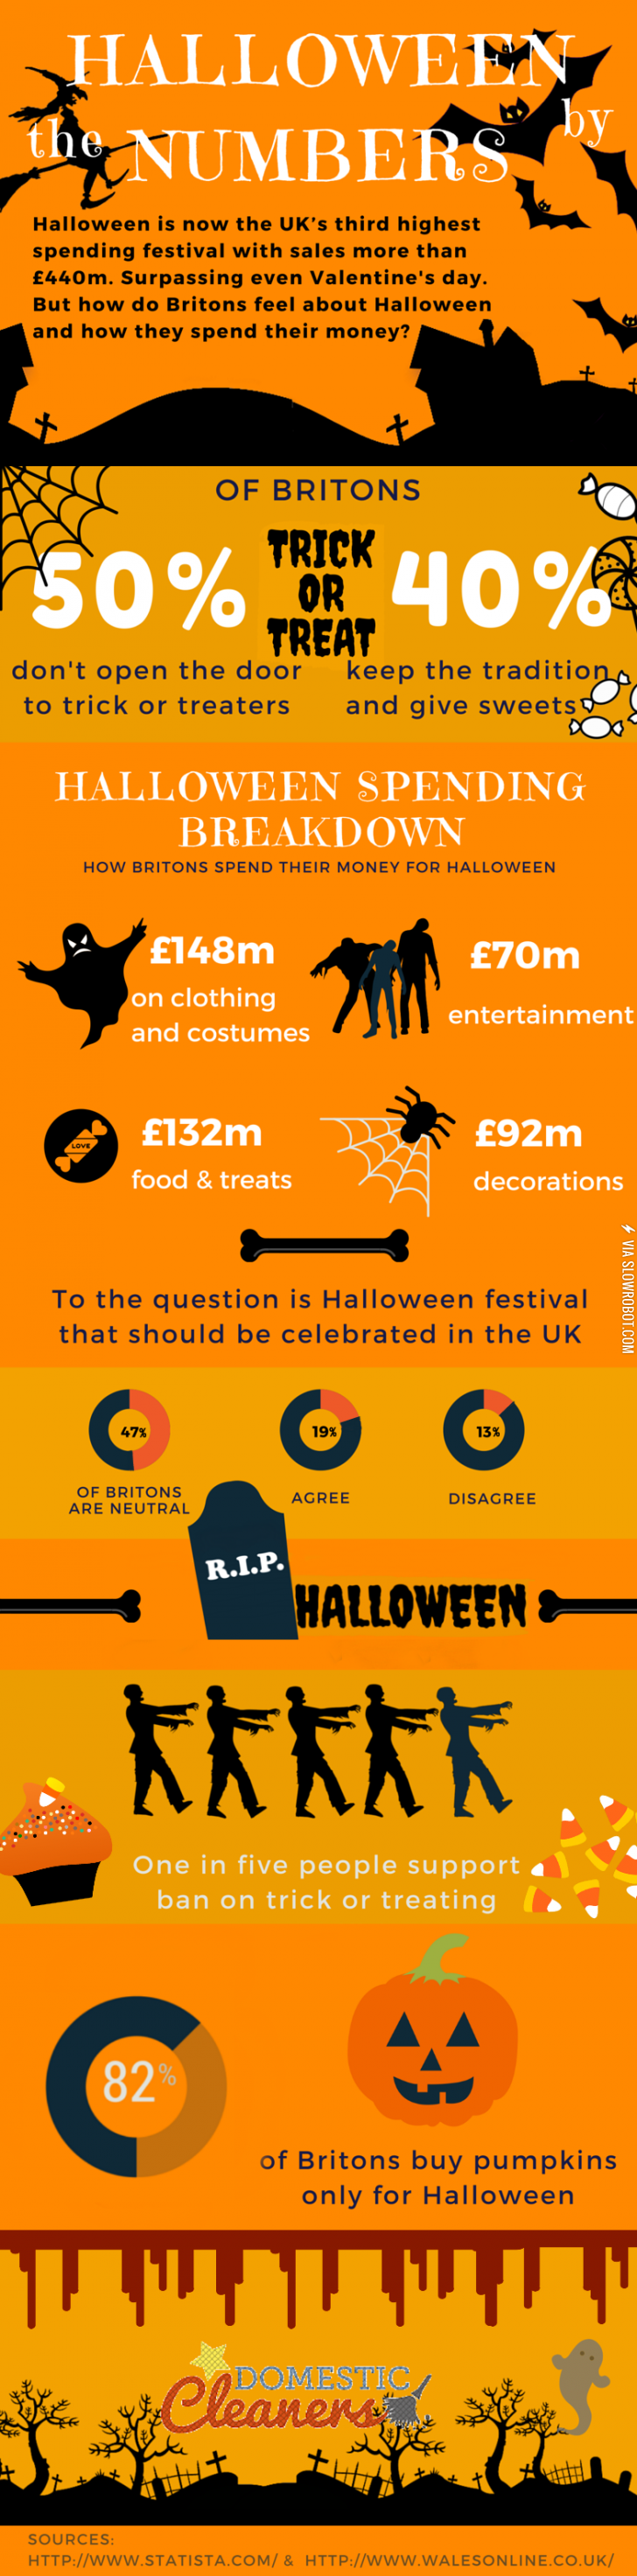 Halloween+by+the+Numbers